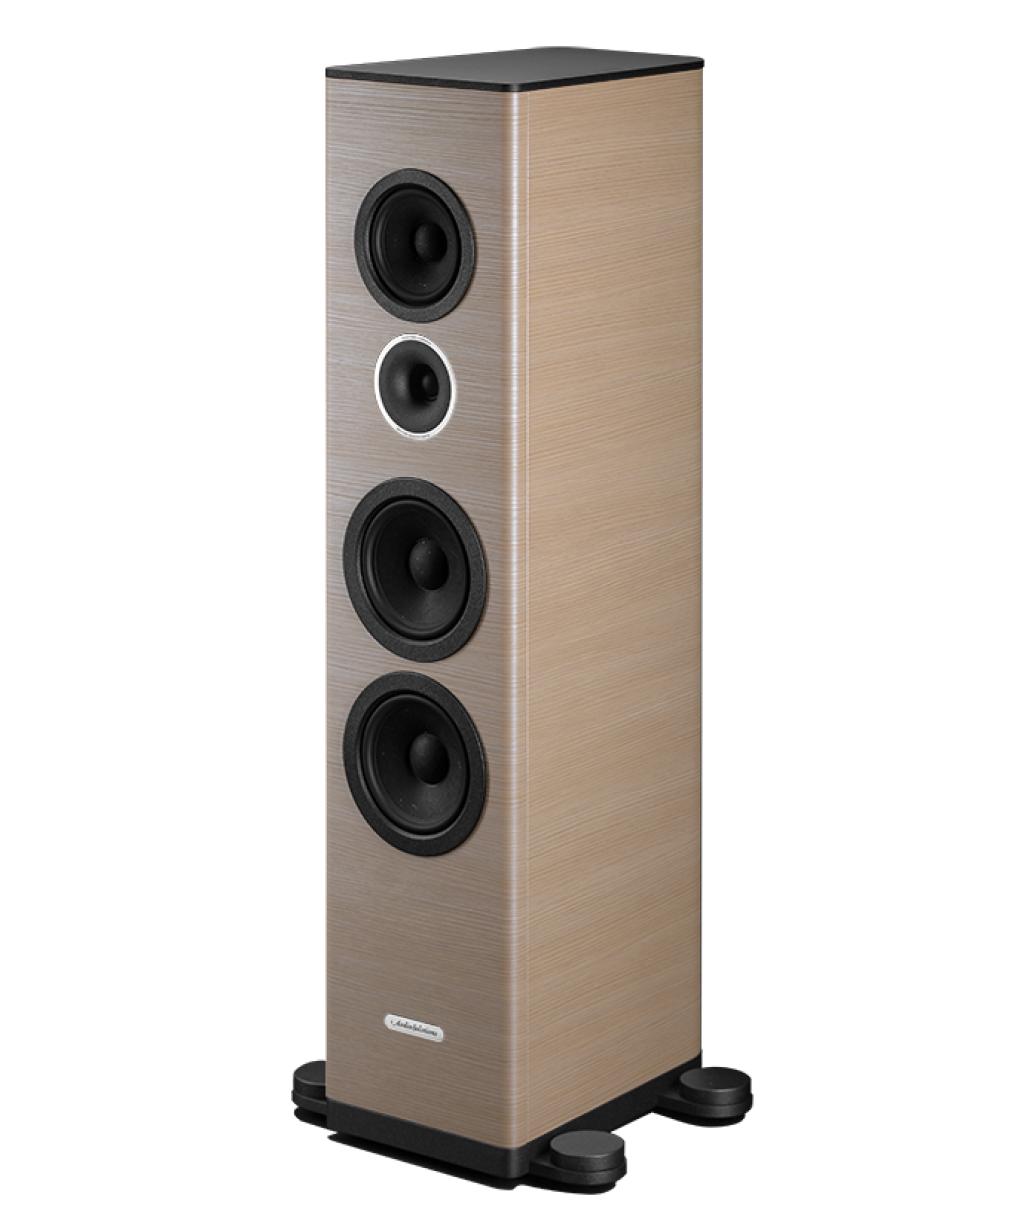 Boxe Audio Solutions Overture O305F Wood collection